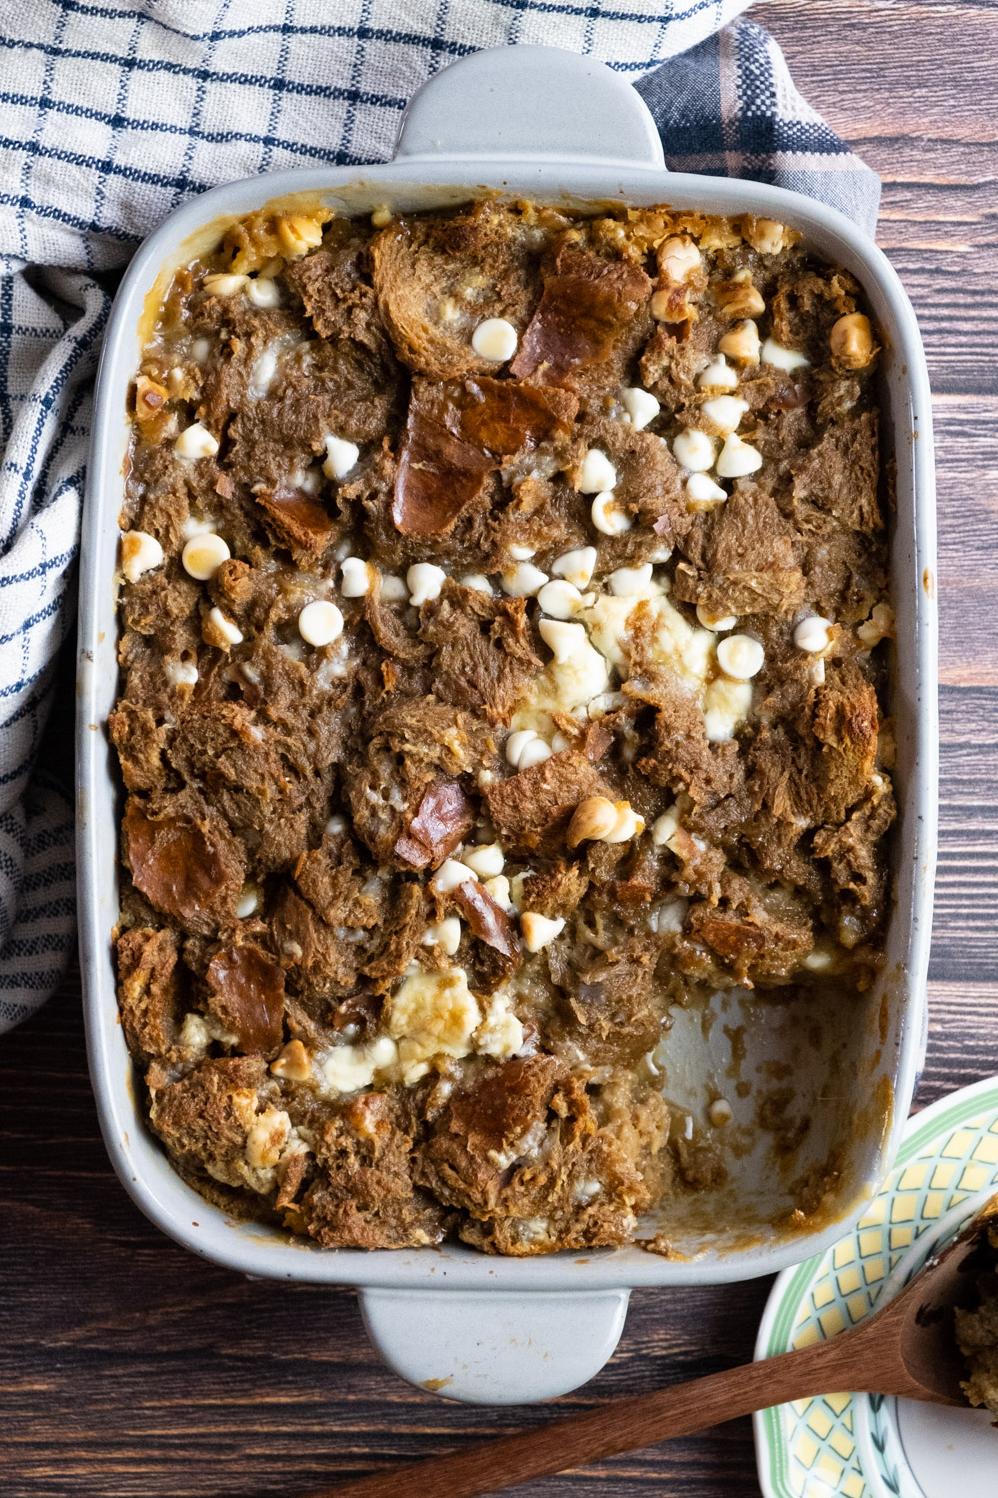  This bread pudding is a heavenly combination of chocolate and espresso flavors